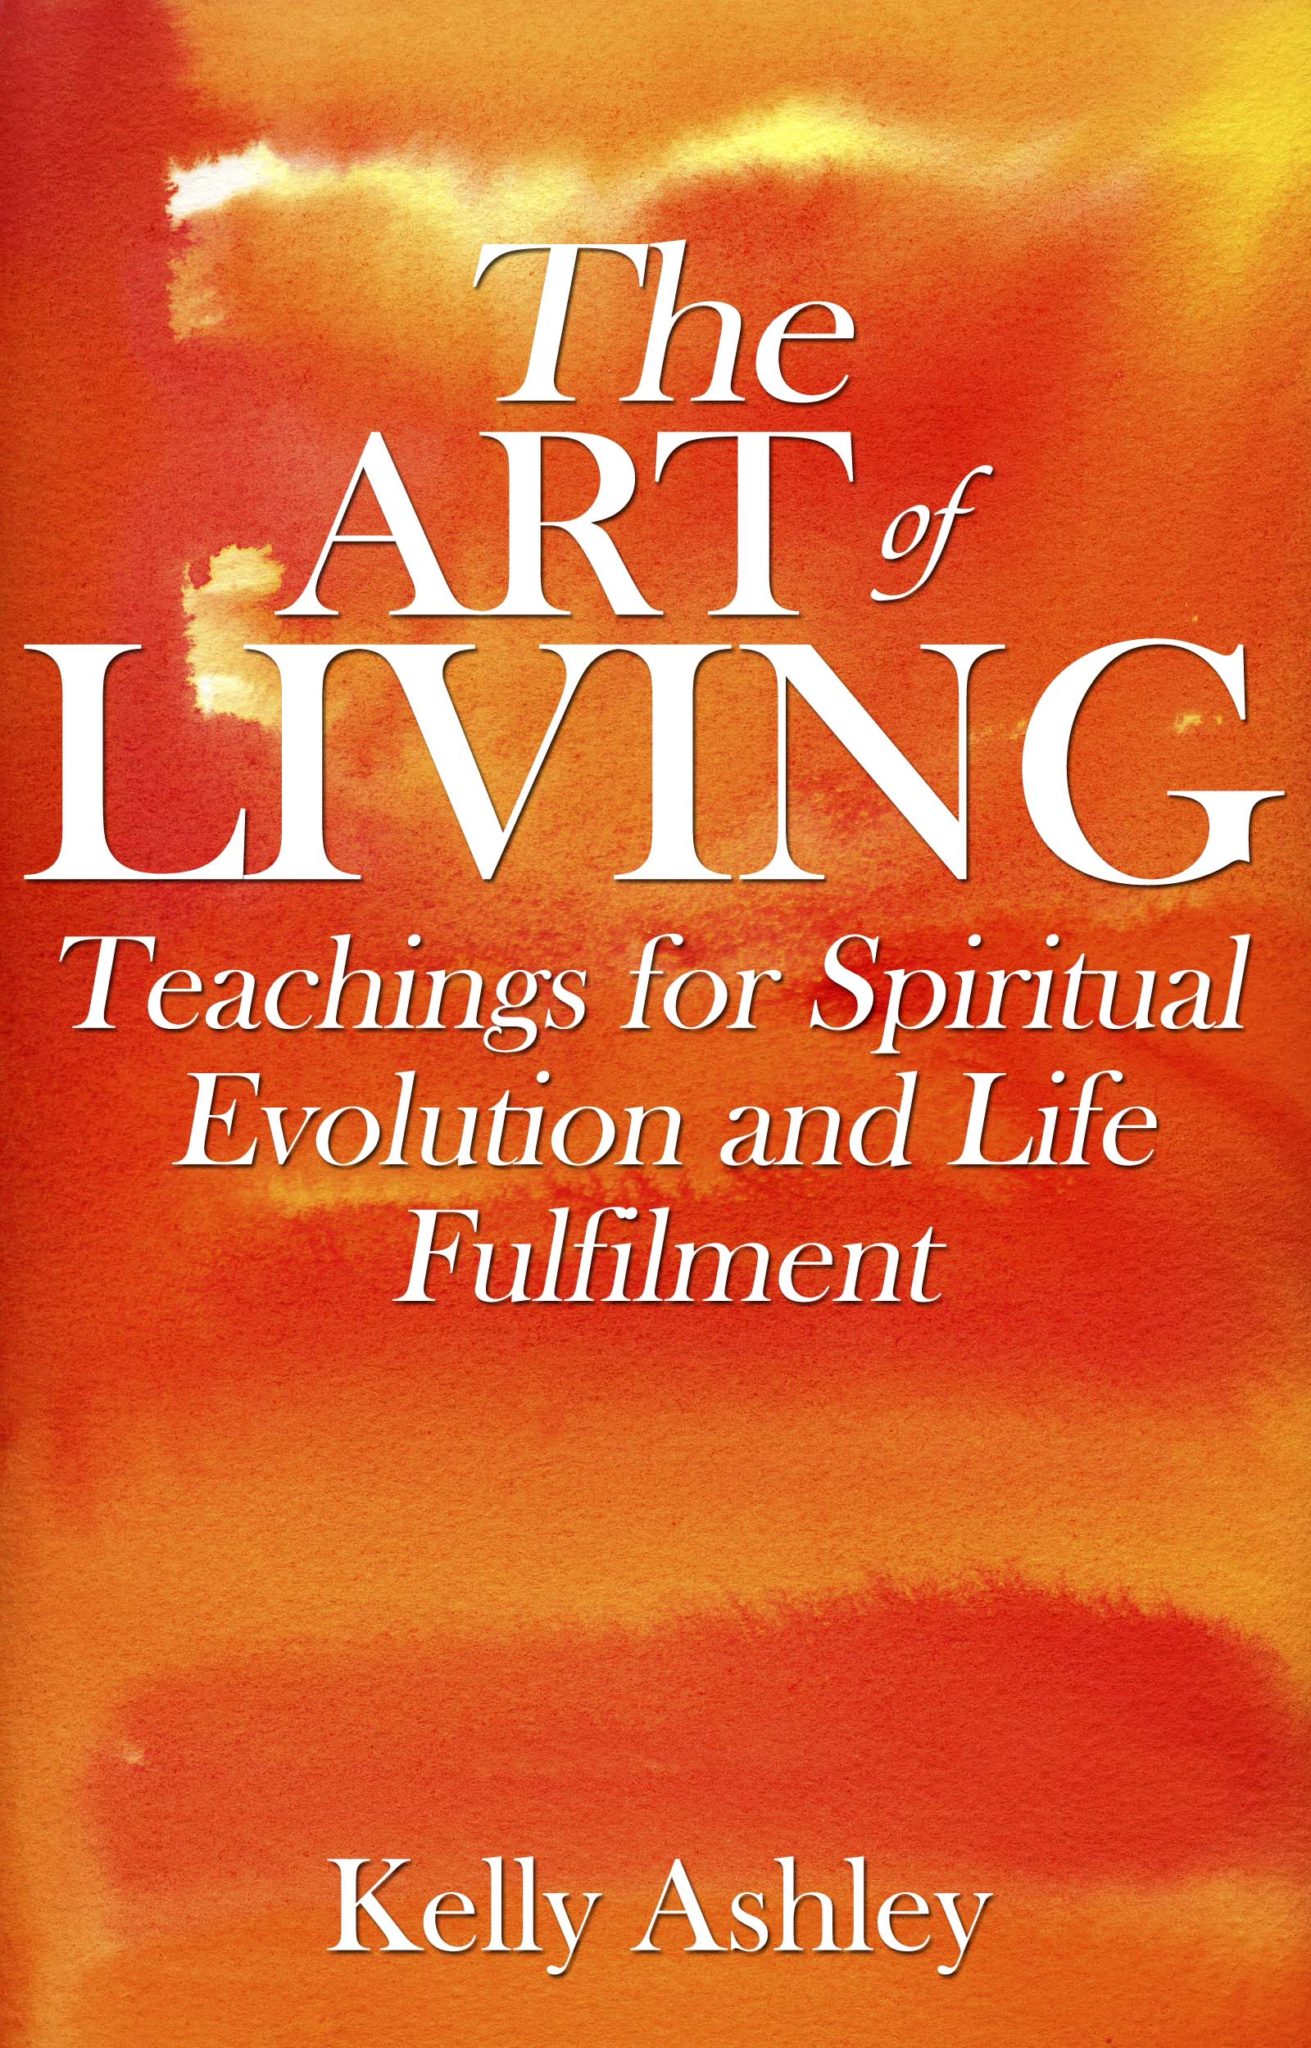 FREE: The Art of Living: teachings for spiritual evolution and life fulfilment by Kelly Ashley